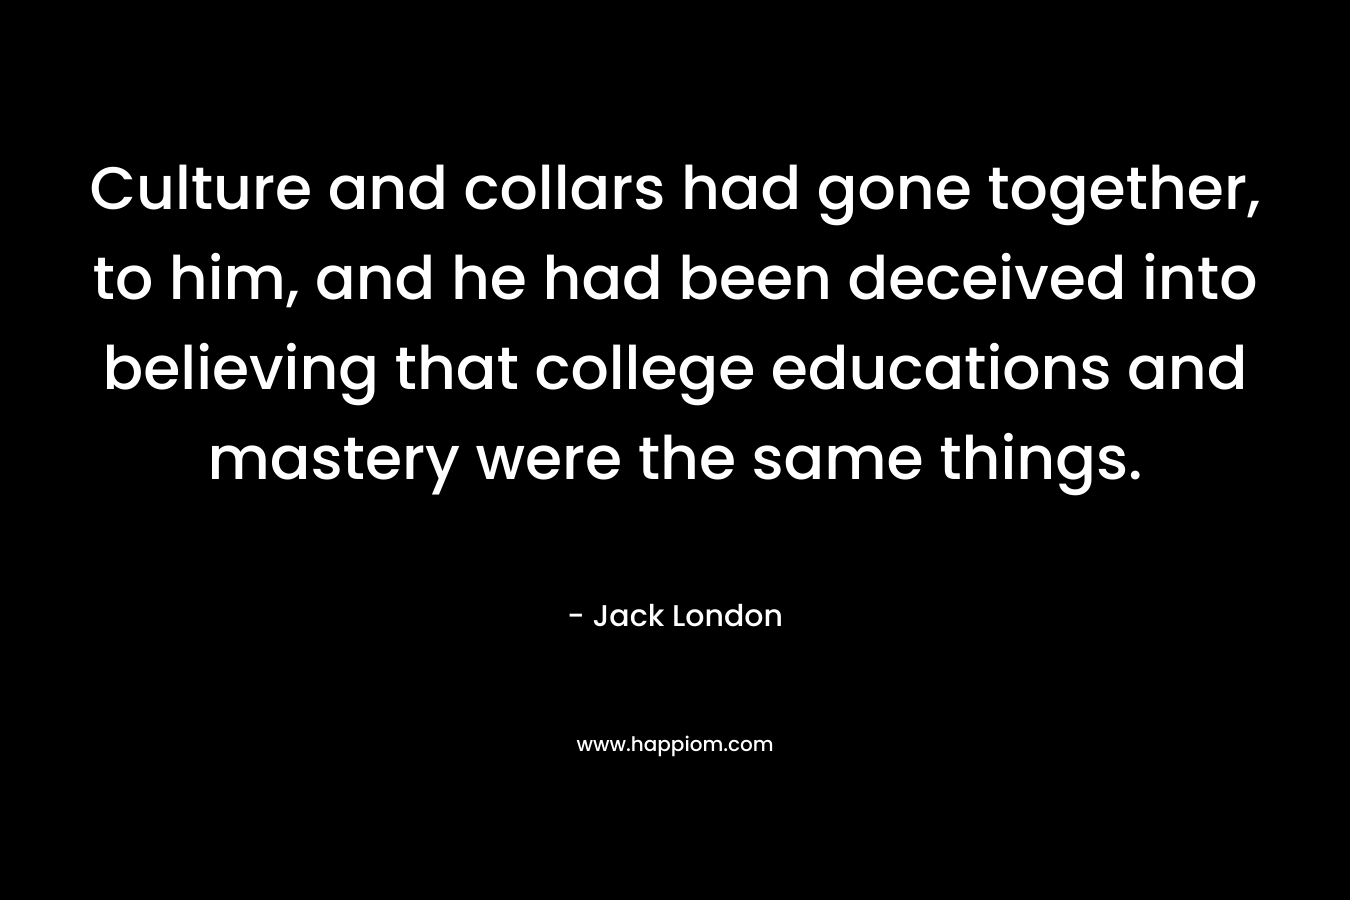 Culture and collars had gone together, to him, and he had been deceived into believing that college educations and mastery were the same things.